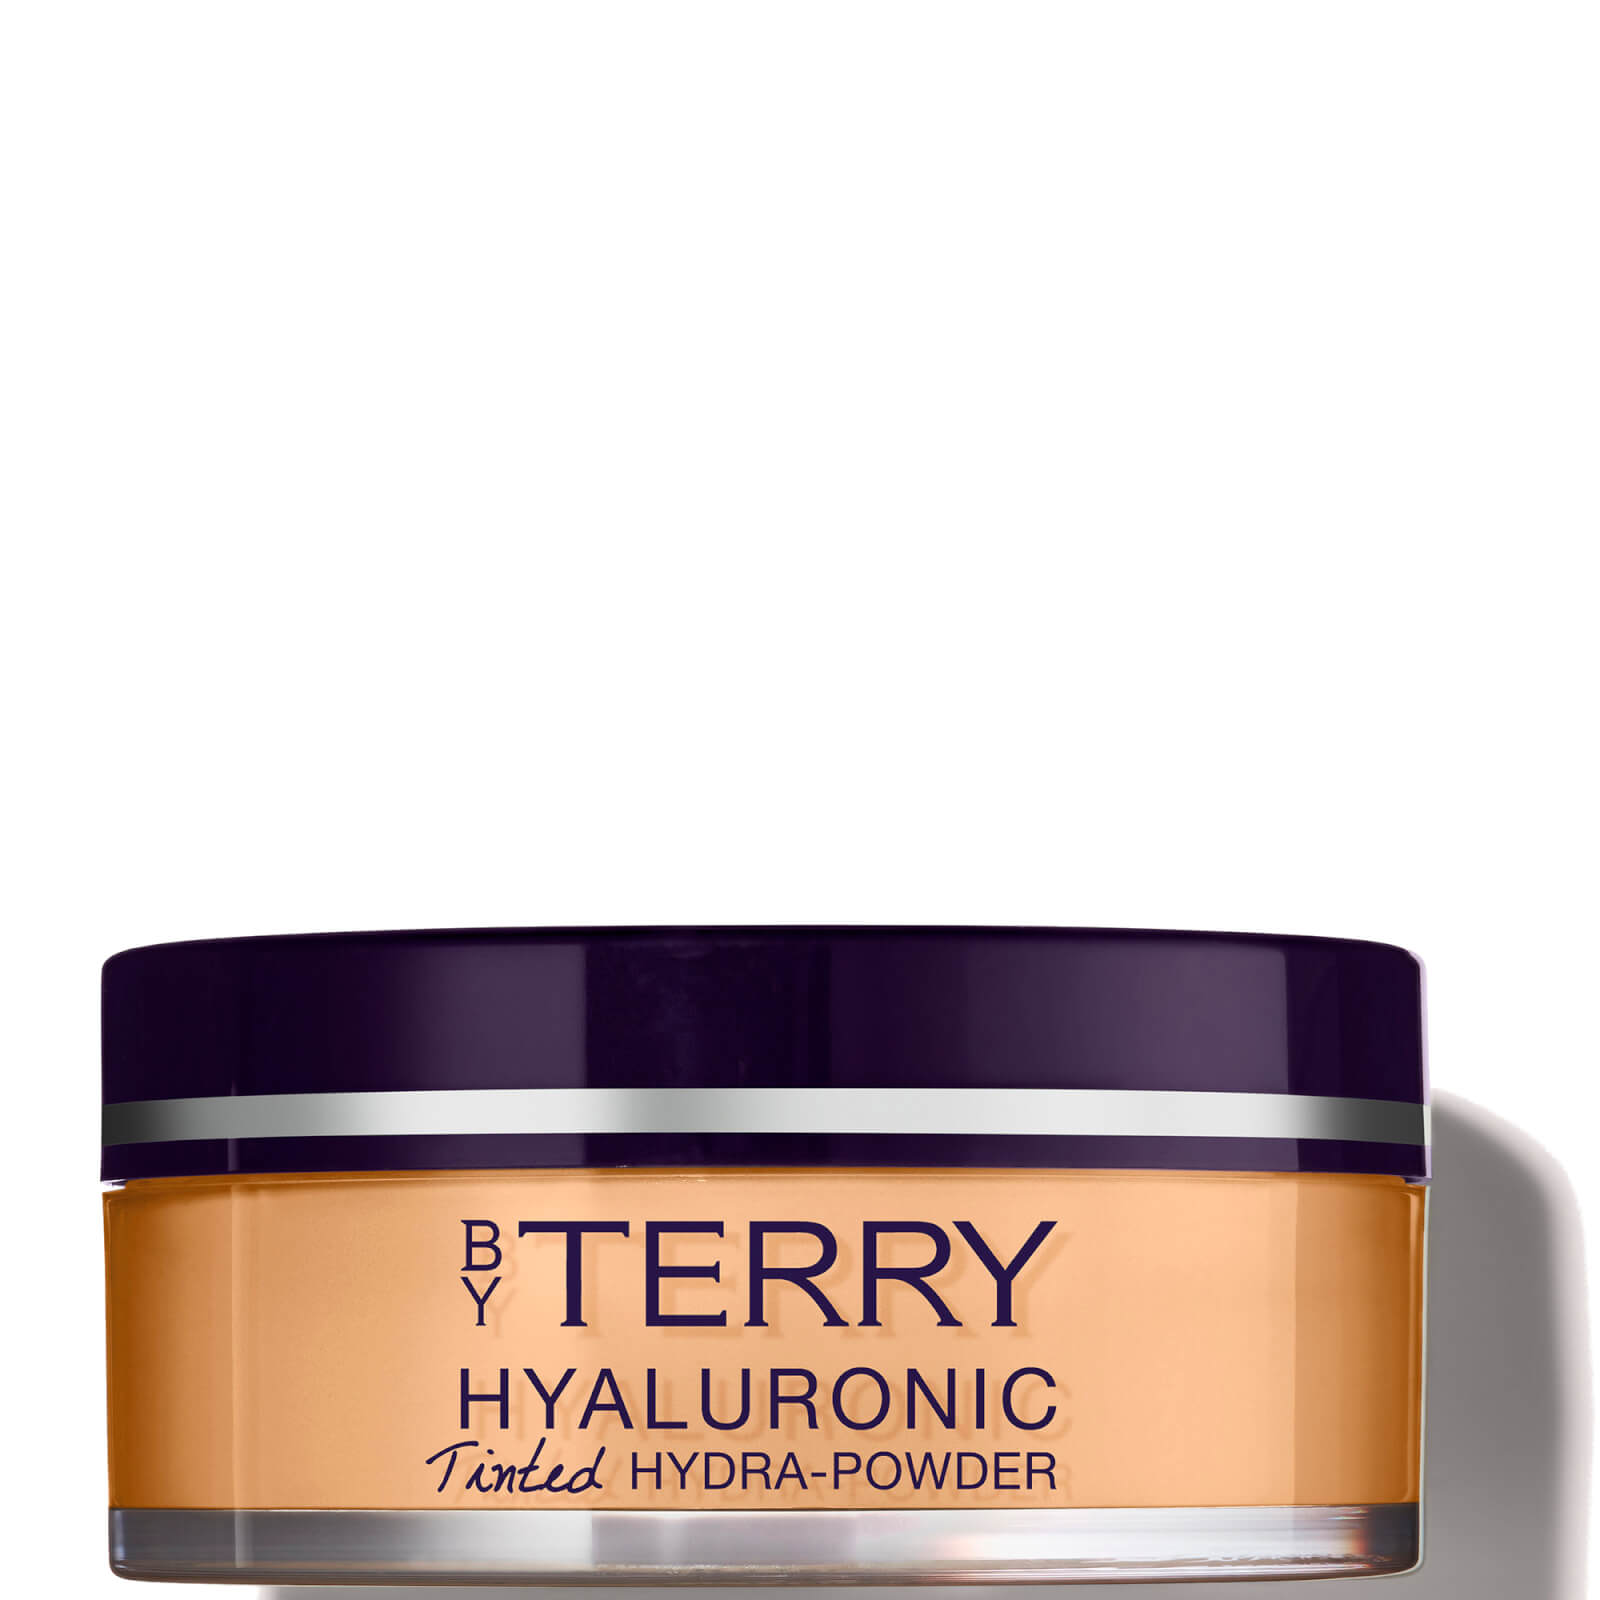 By Terry Hyaluronic Tinted Hydra-Powder 10g (Various Shades) - N400. Medium